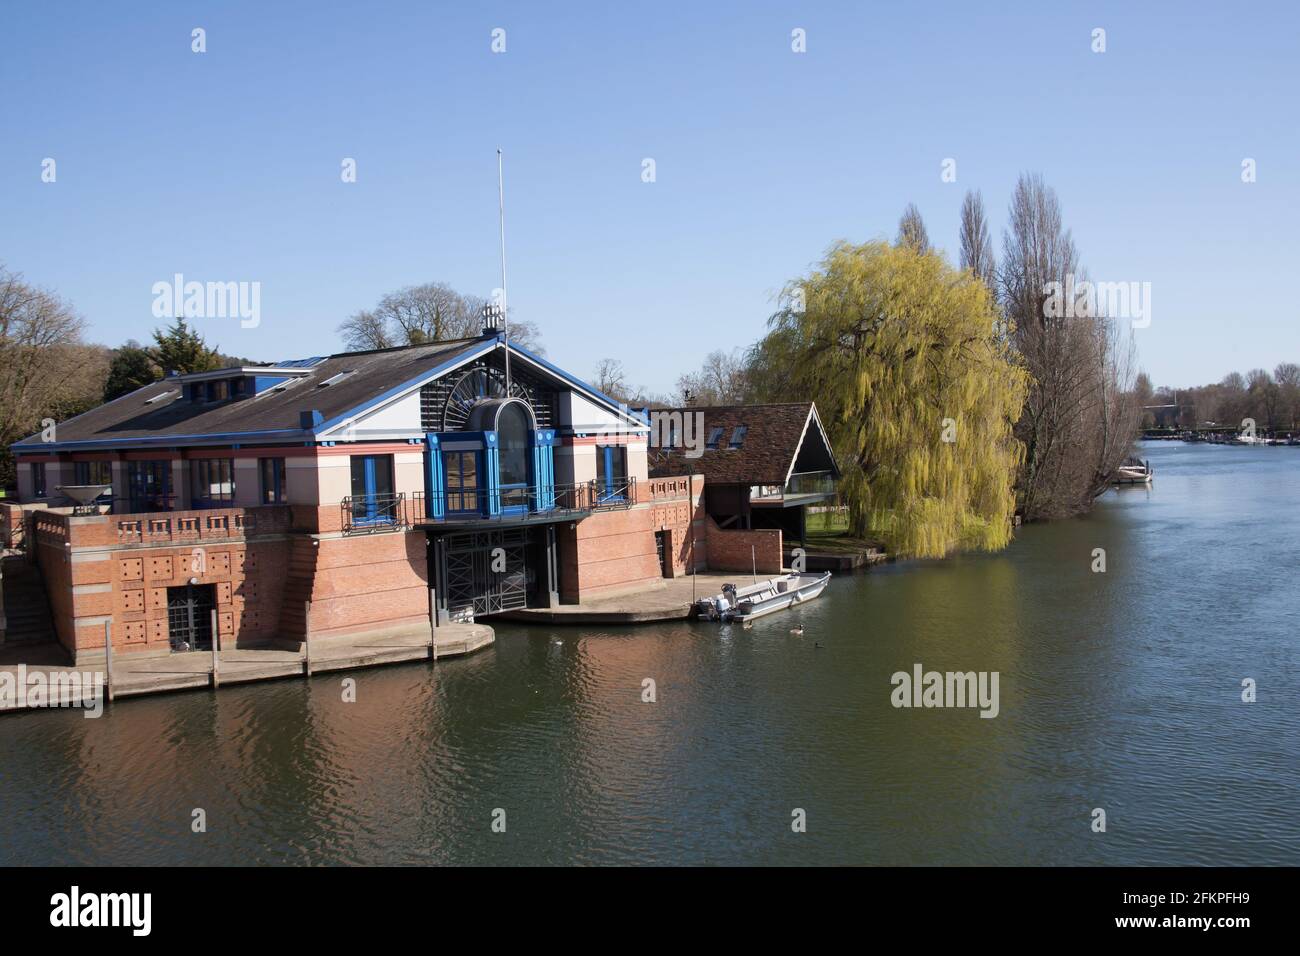 Views of The Thames River at Henley on Thames in Oxfordshire in the UK Stock Photo